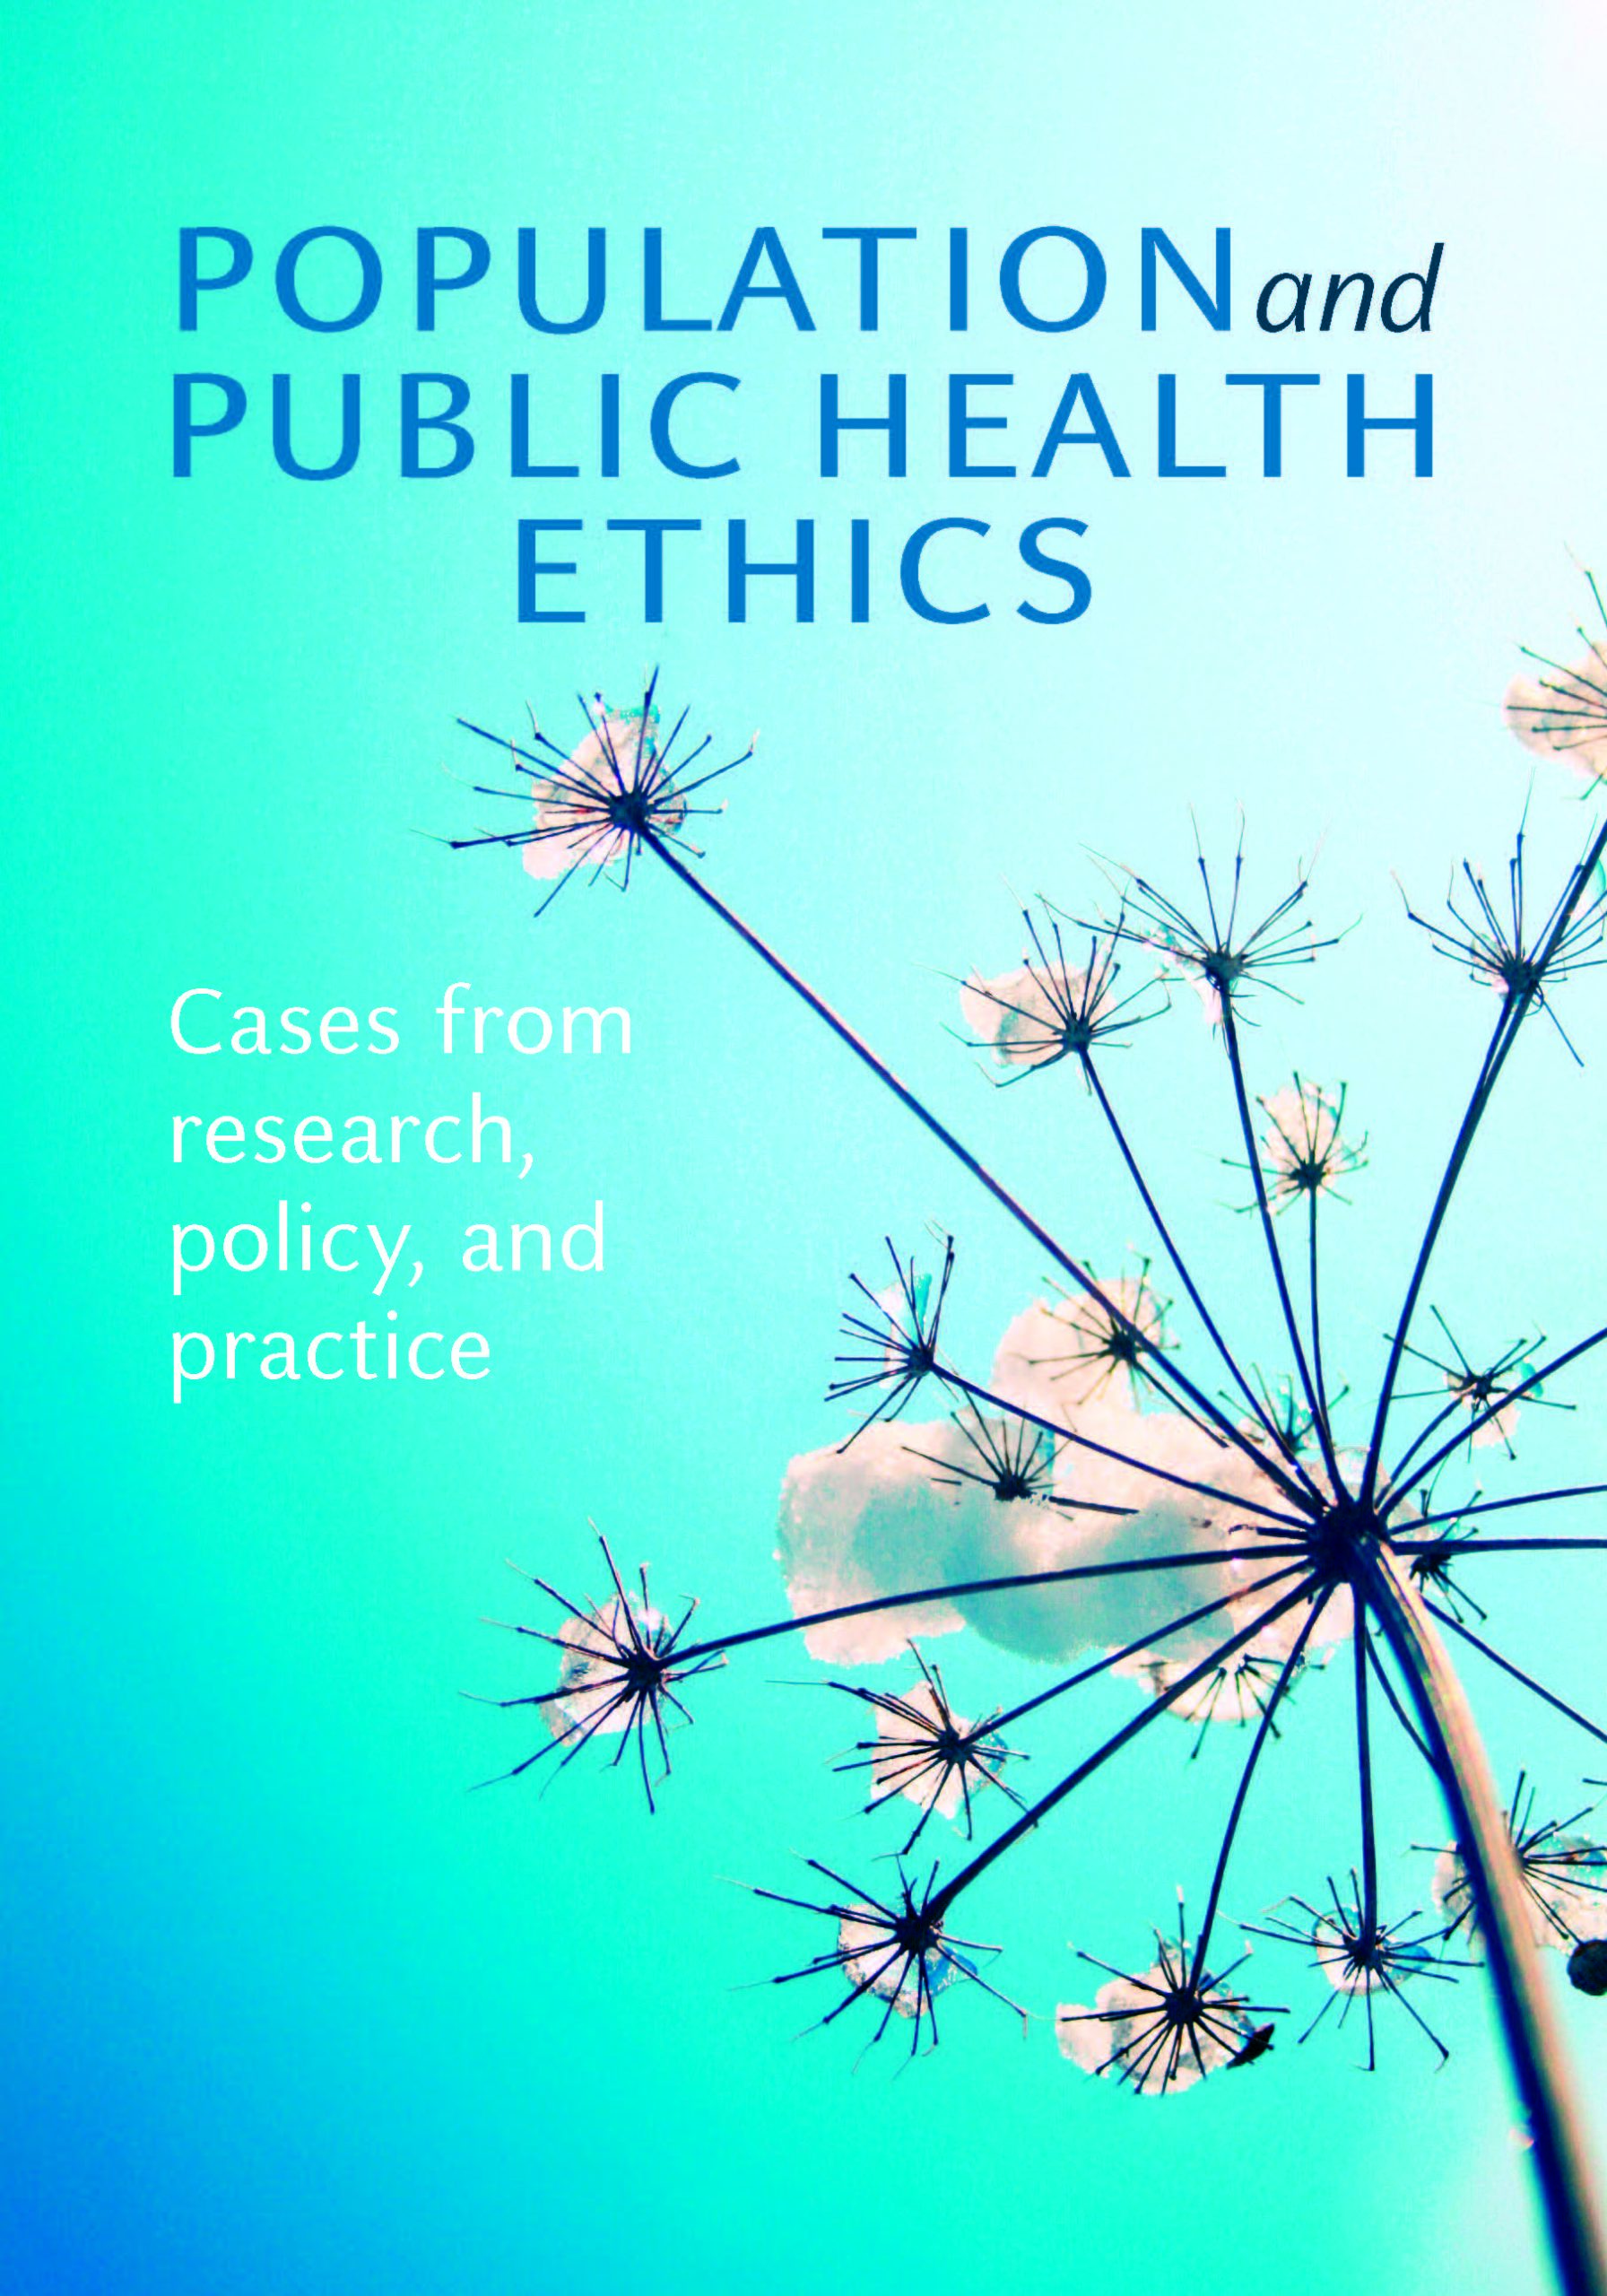 Population and Public Health Ethics: Cases from research, policy, and practice